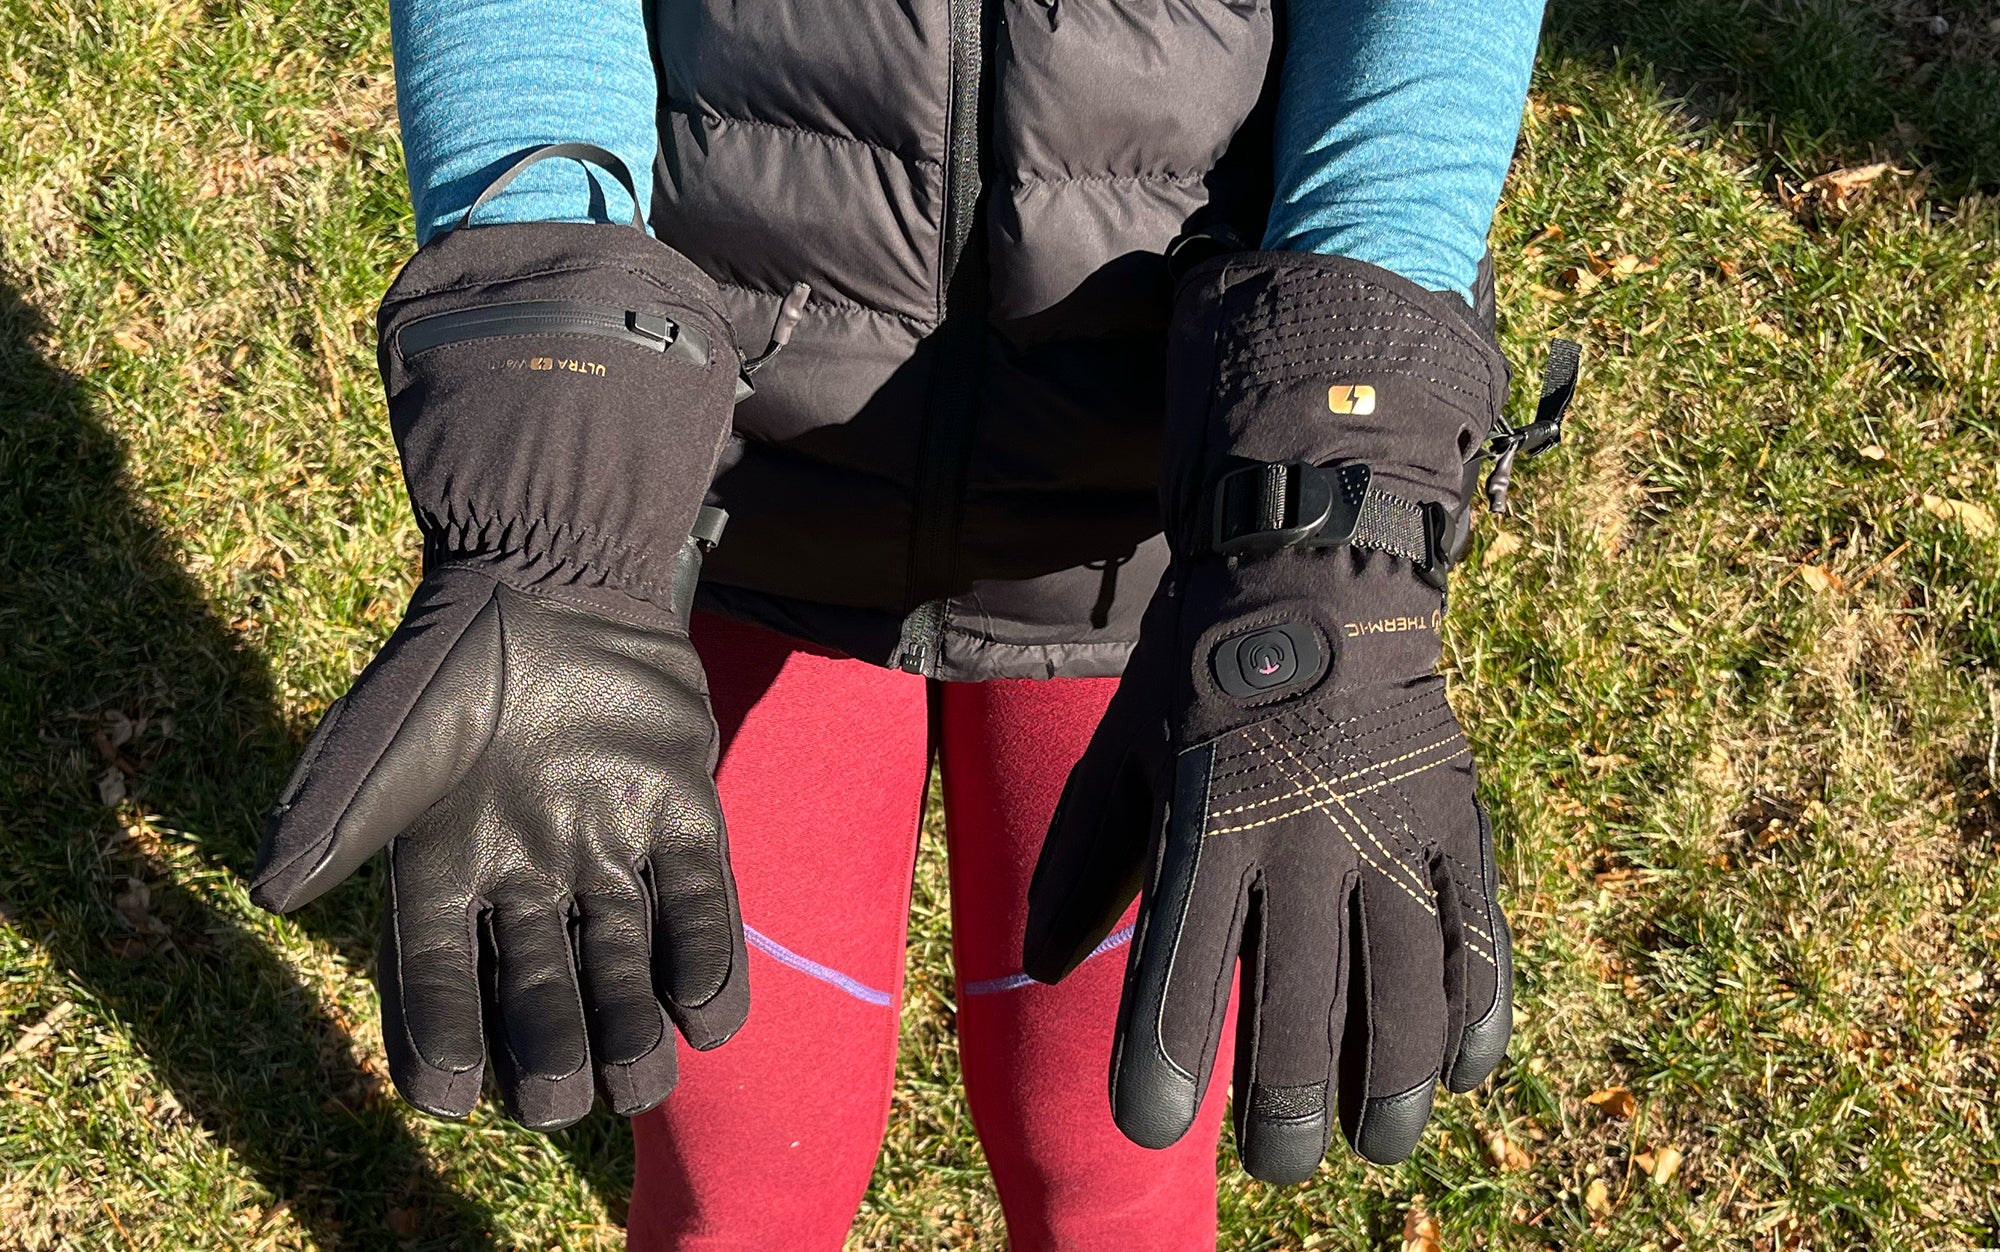 heated gloves on hands